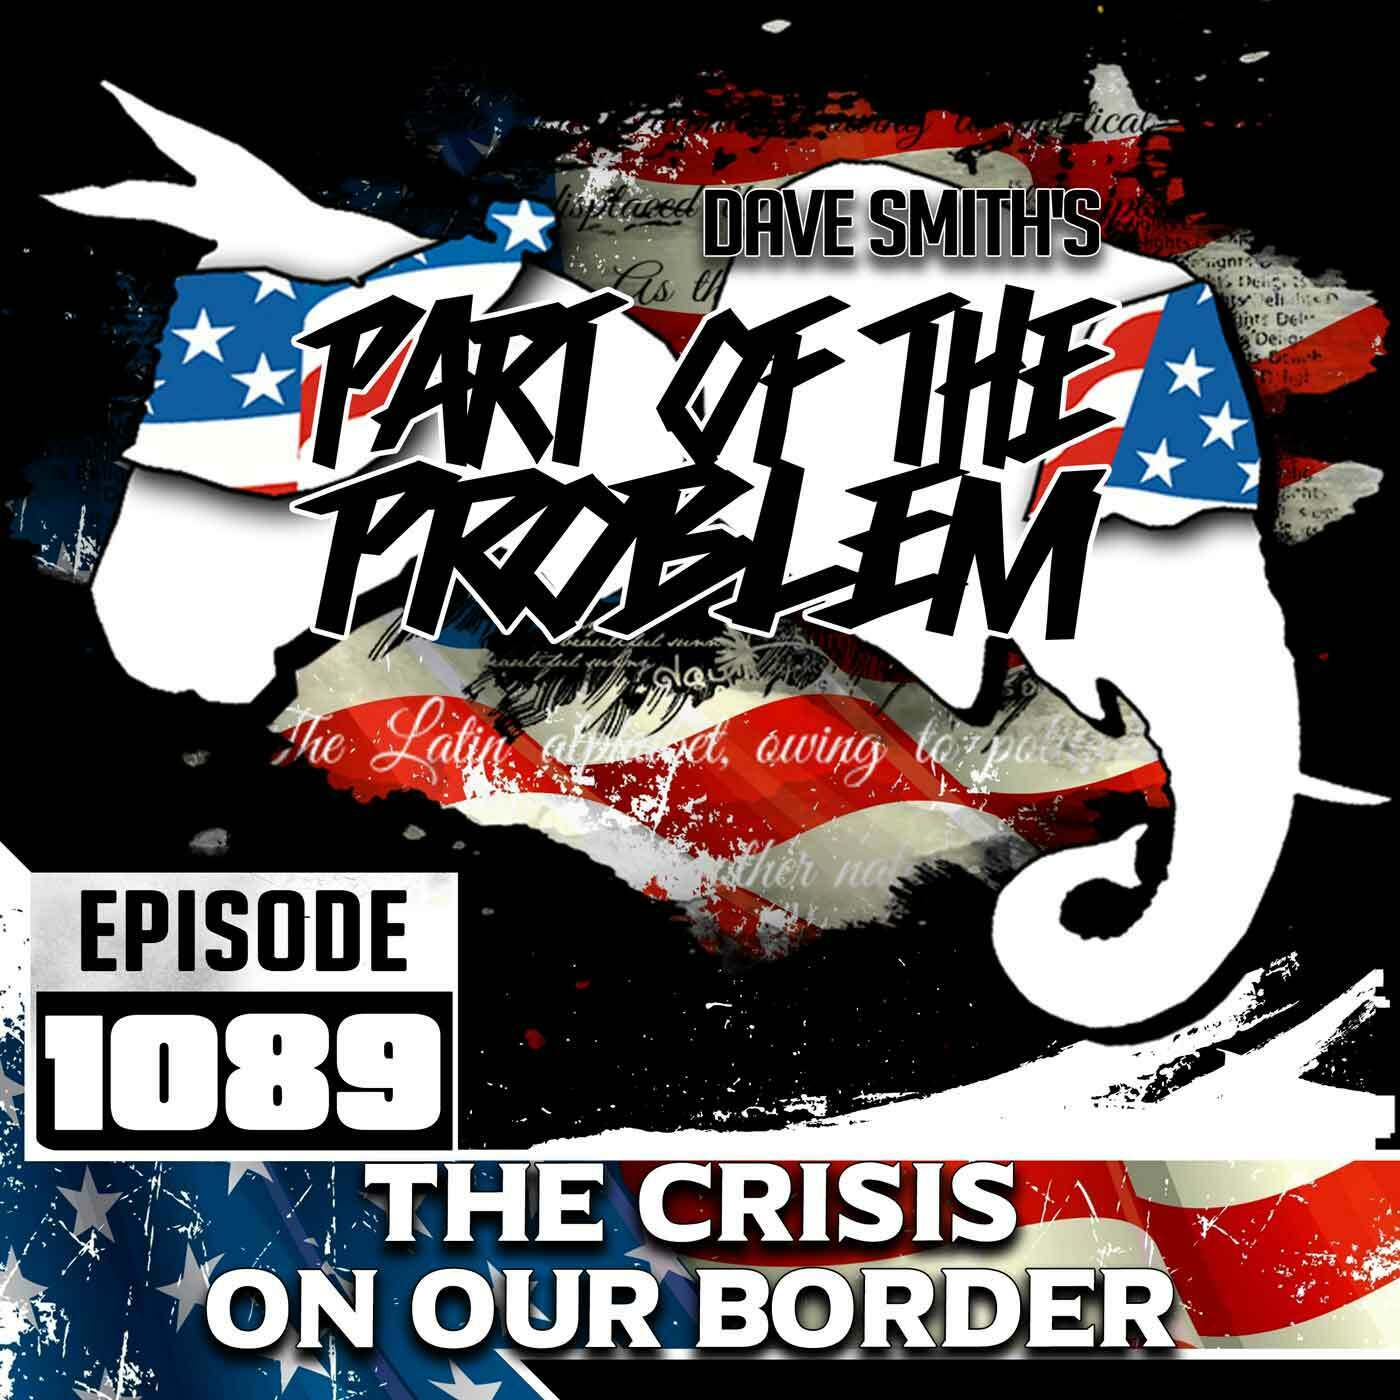 The Crisis On Our Border